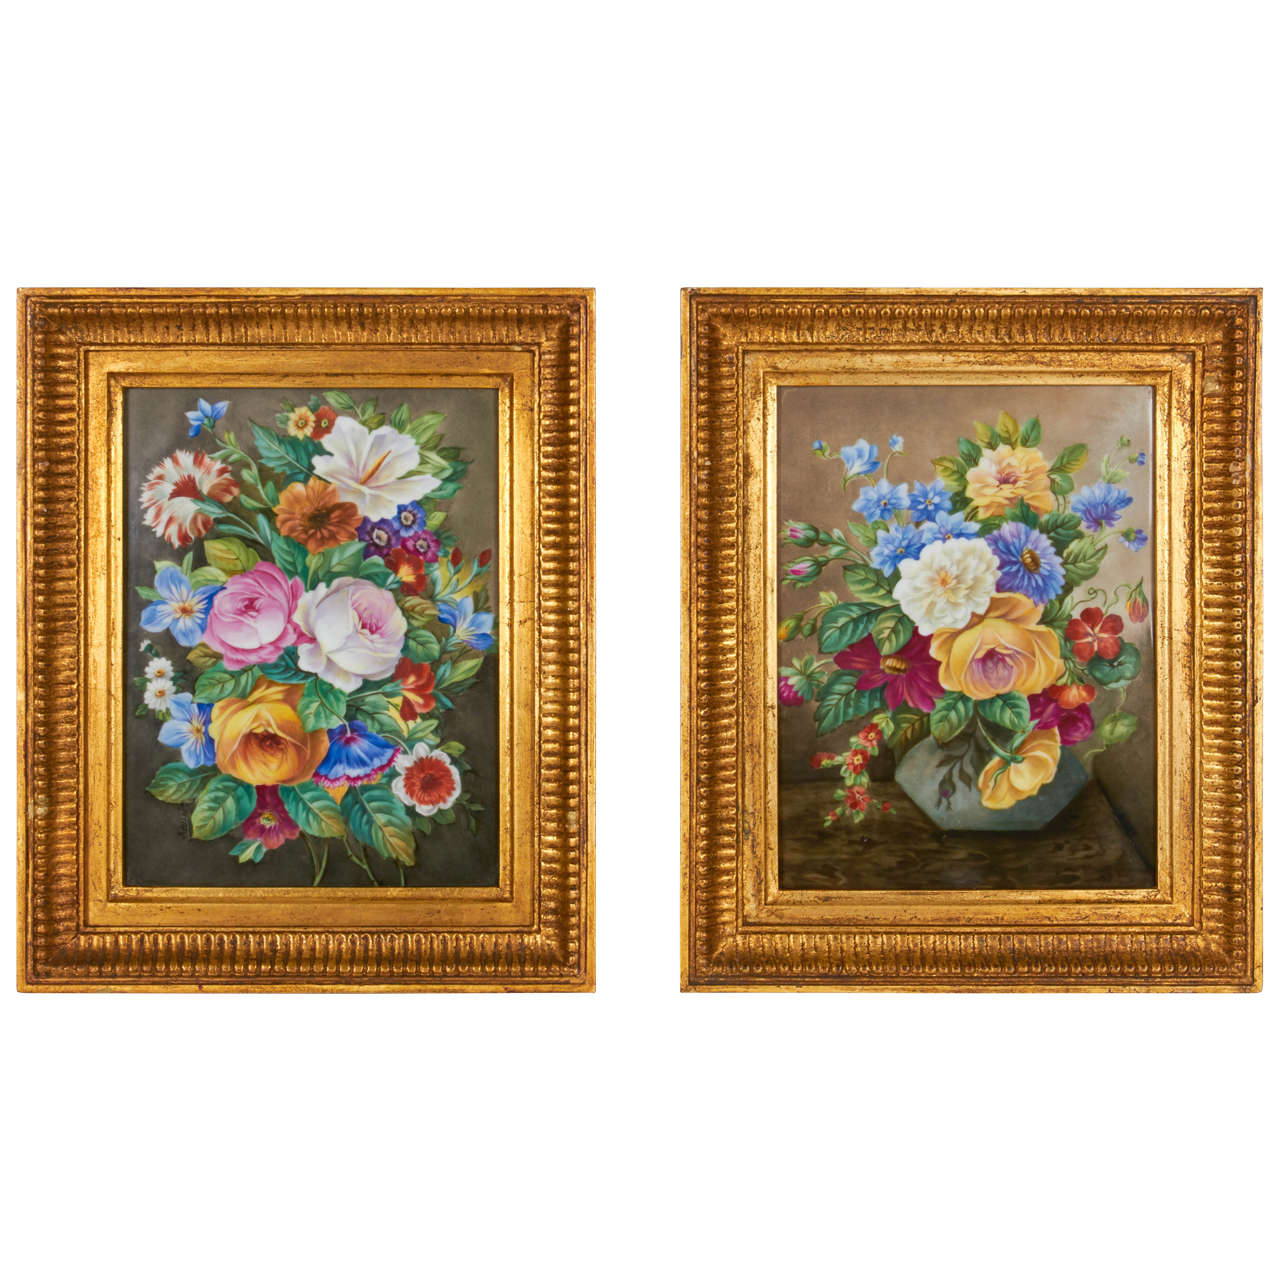 Pair of Hand-Painted Porcelain Plaques of Floral Still-Life Paintings For Sale